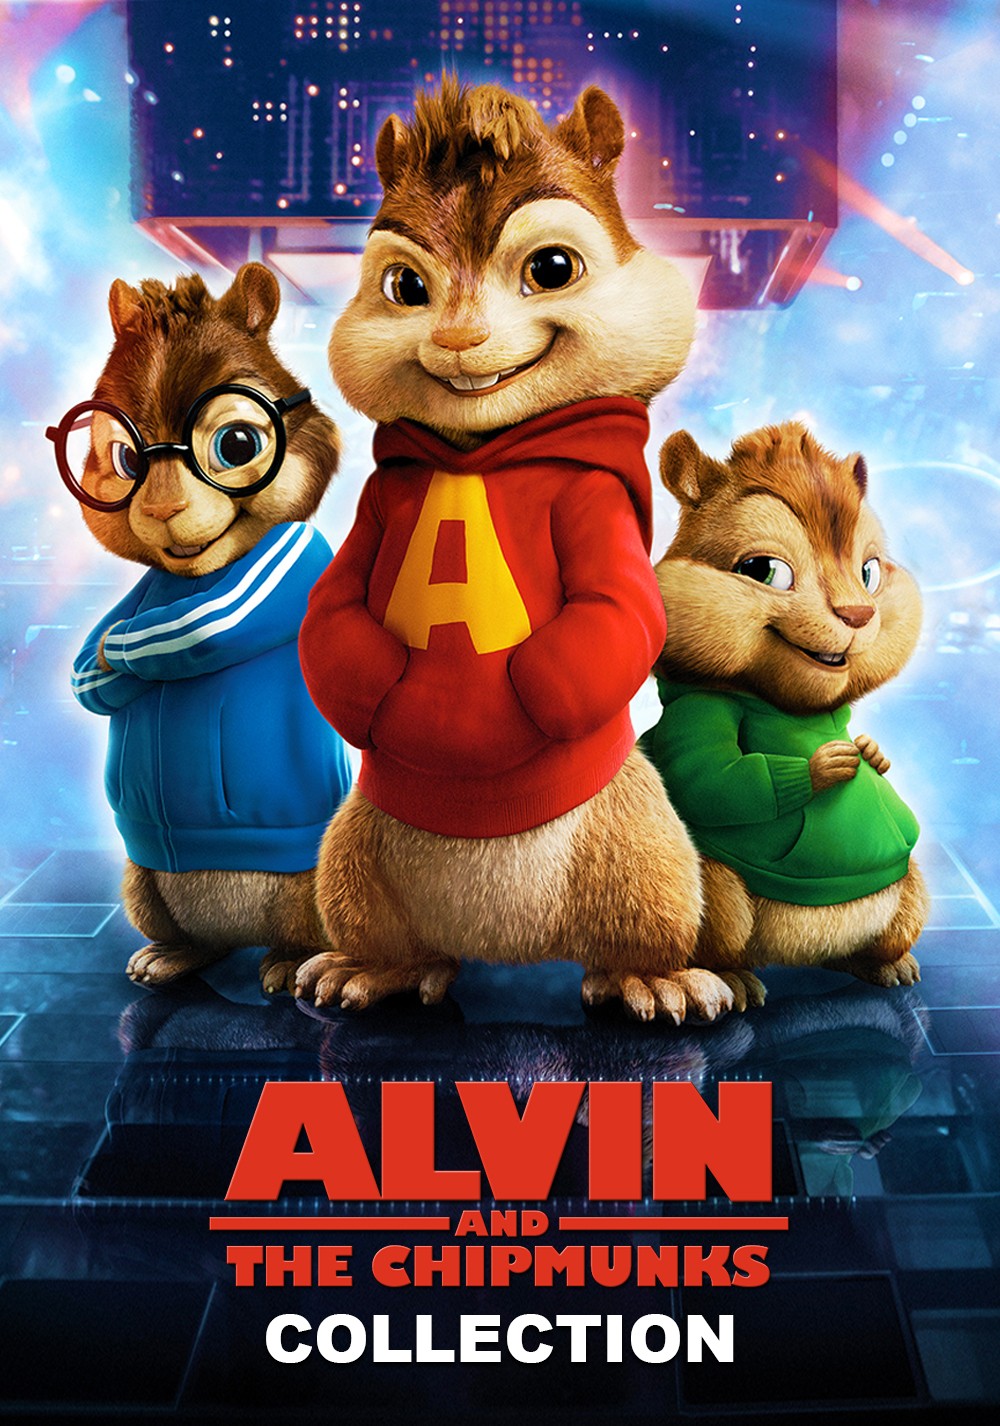 Alvin and the Chipmunks - Plex Collection Posters